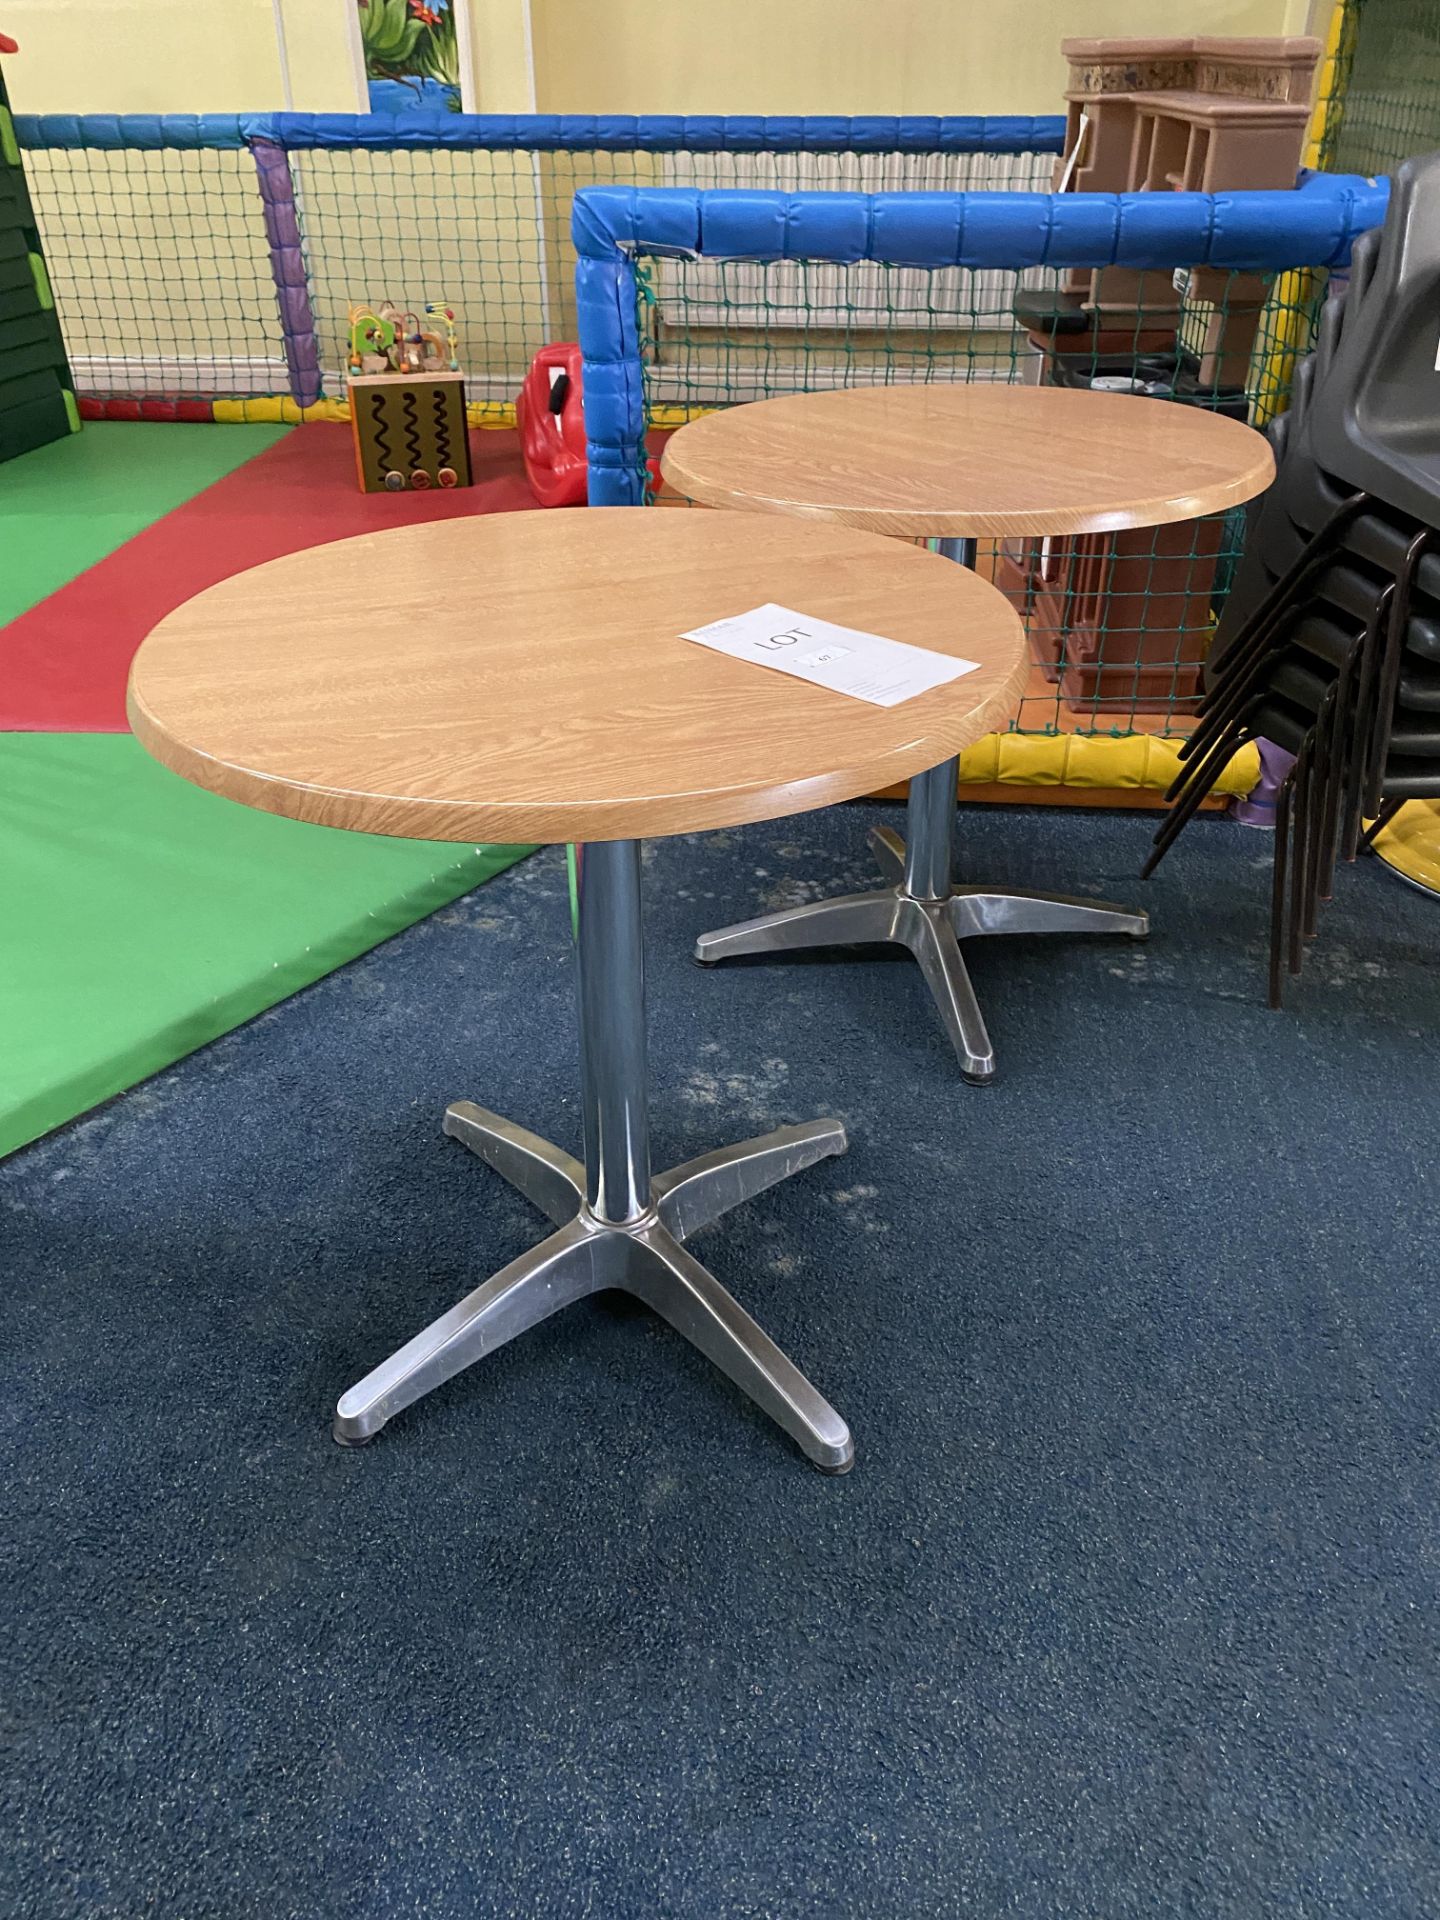 2x Light Oak Effect Circular Tables with Steel Frame - Image 3 of 10